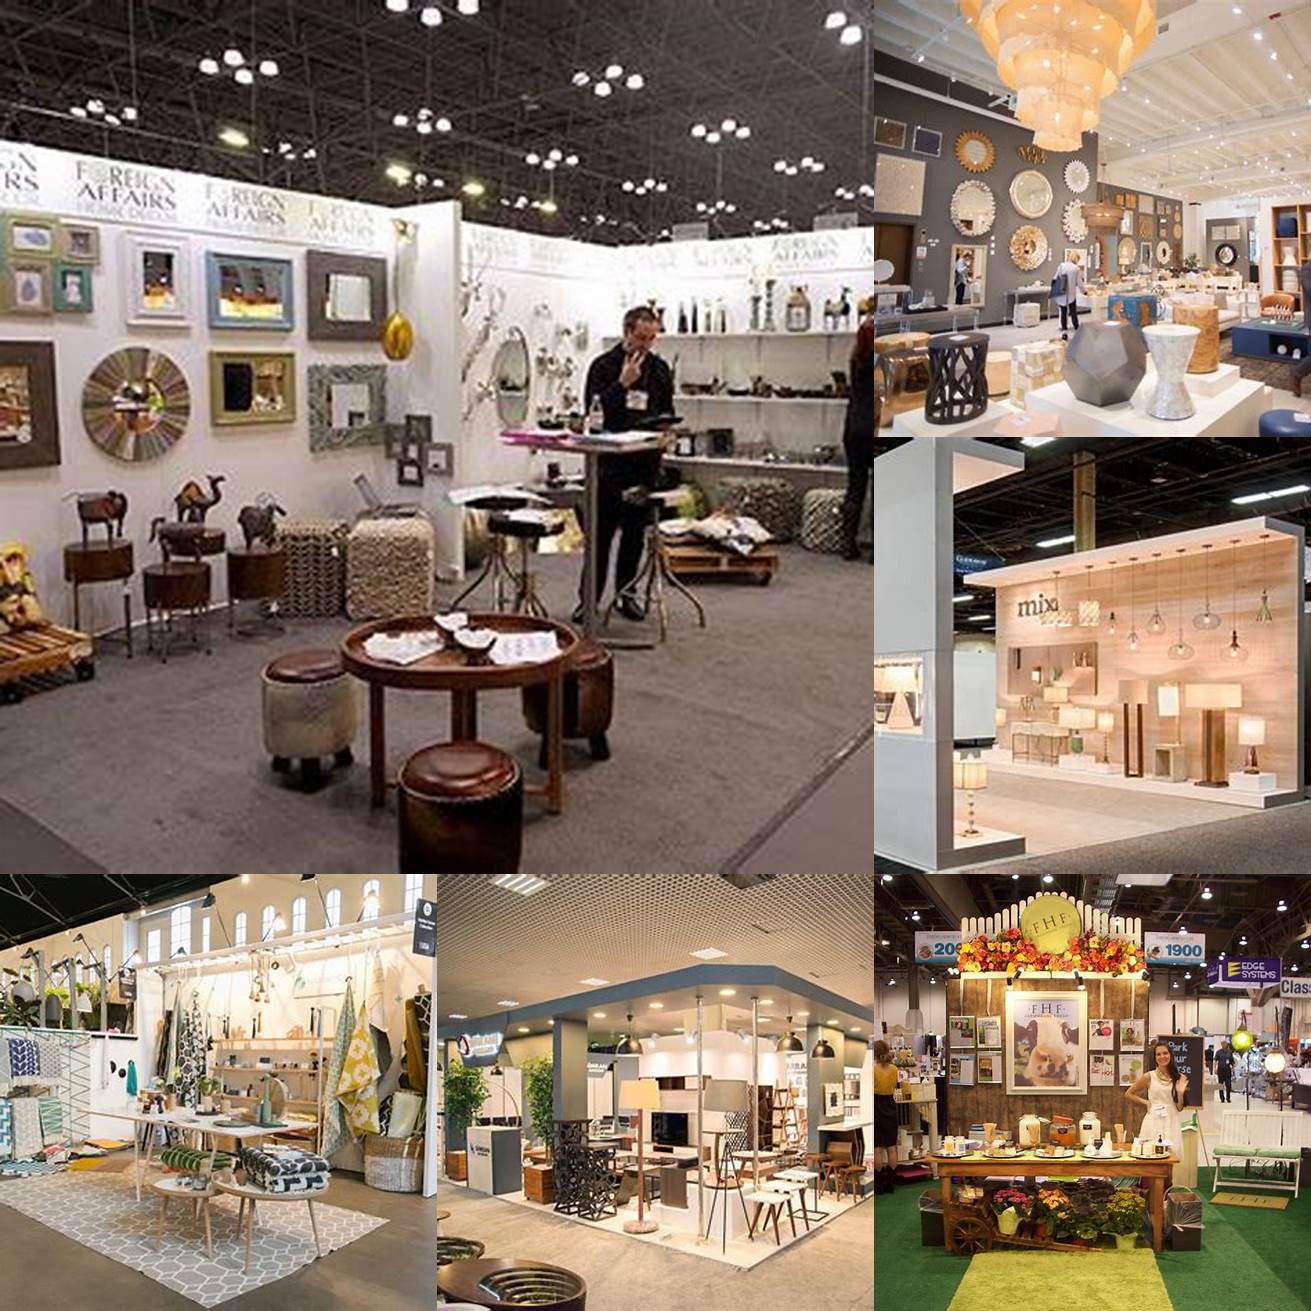 Attend home decor trade shows to connect with wholesale distributors and see their products in person